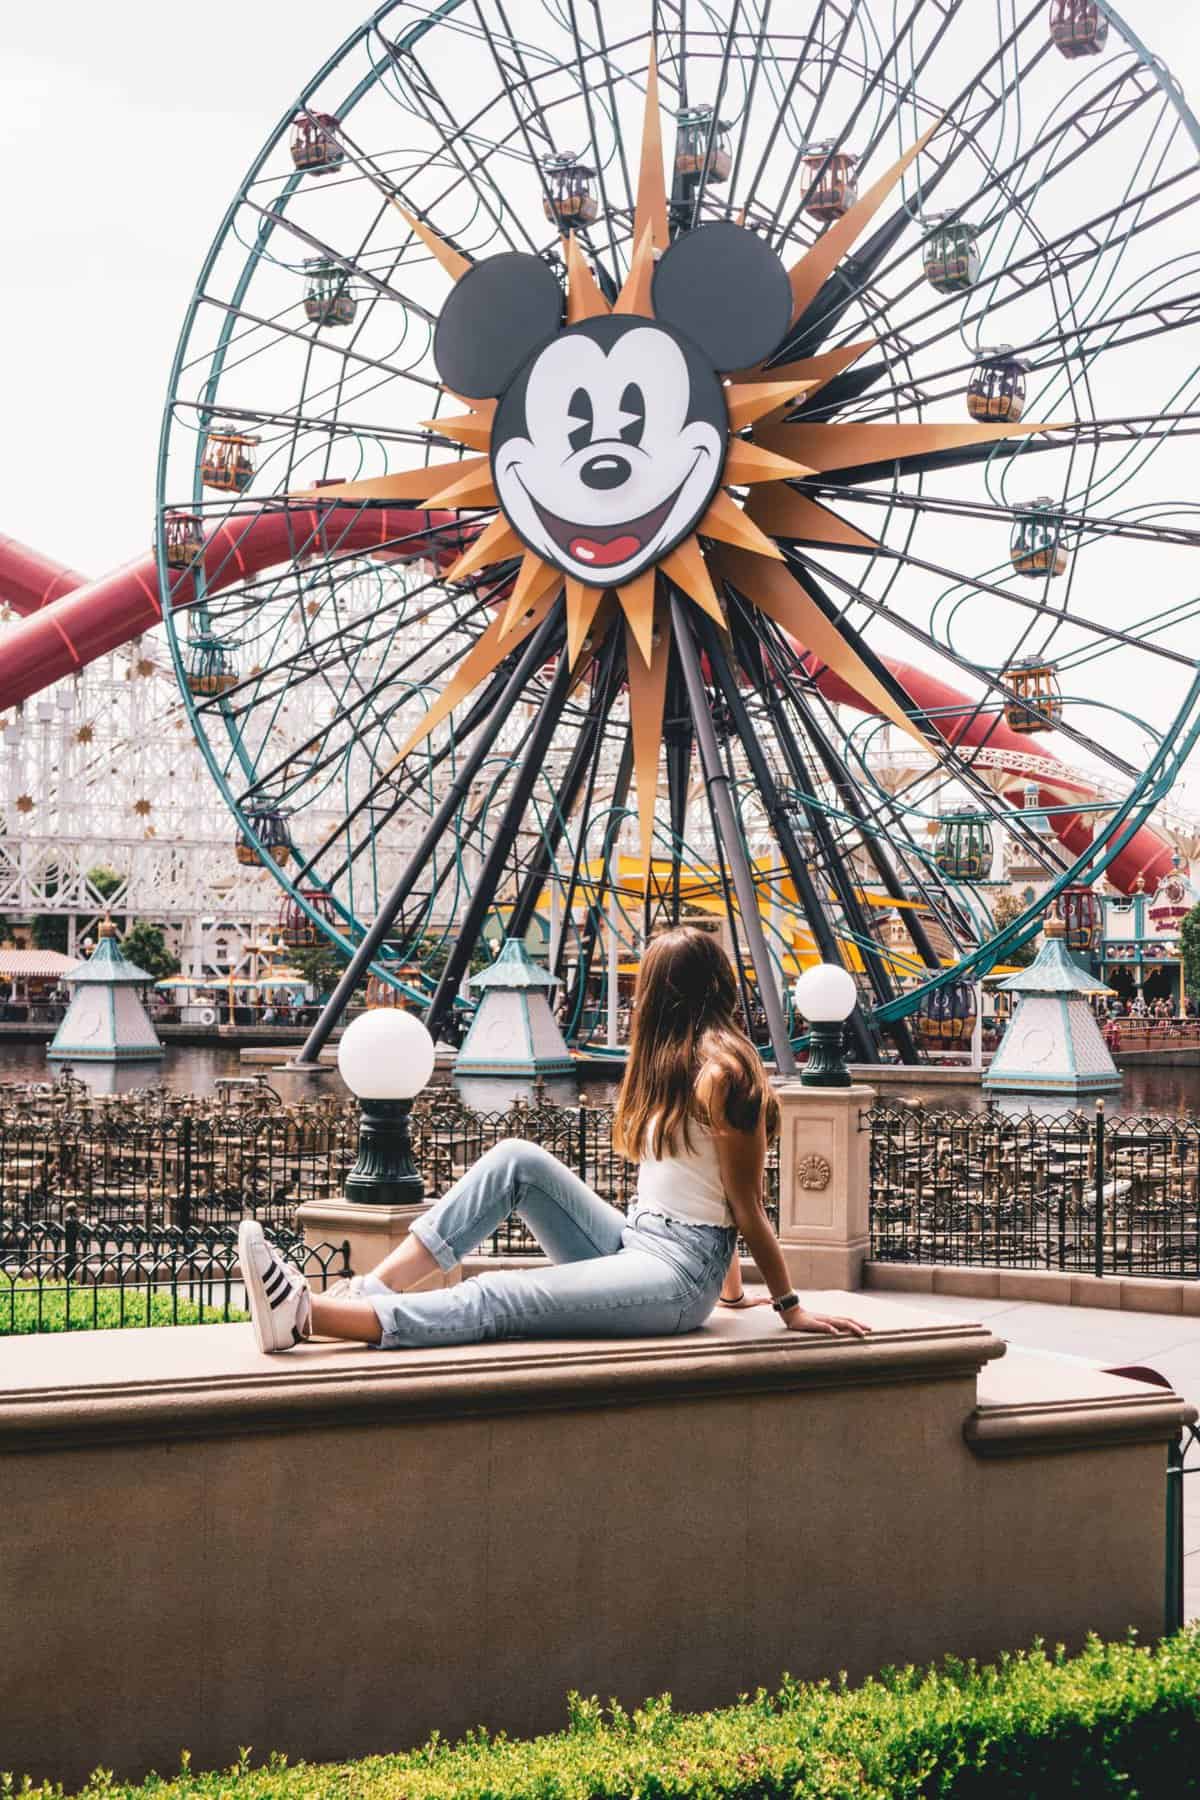 A girl posing in front of the Mickey Mouse Ferris Wheel in Disneyland California.